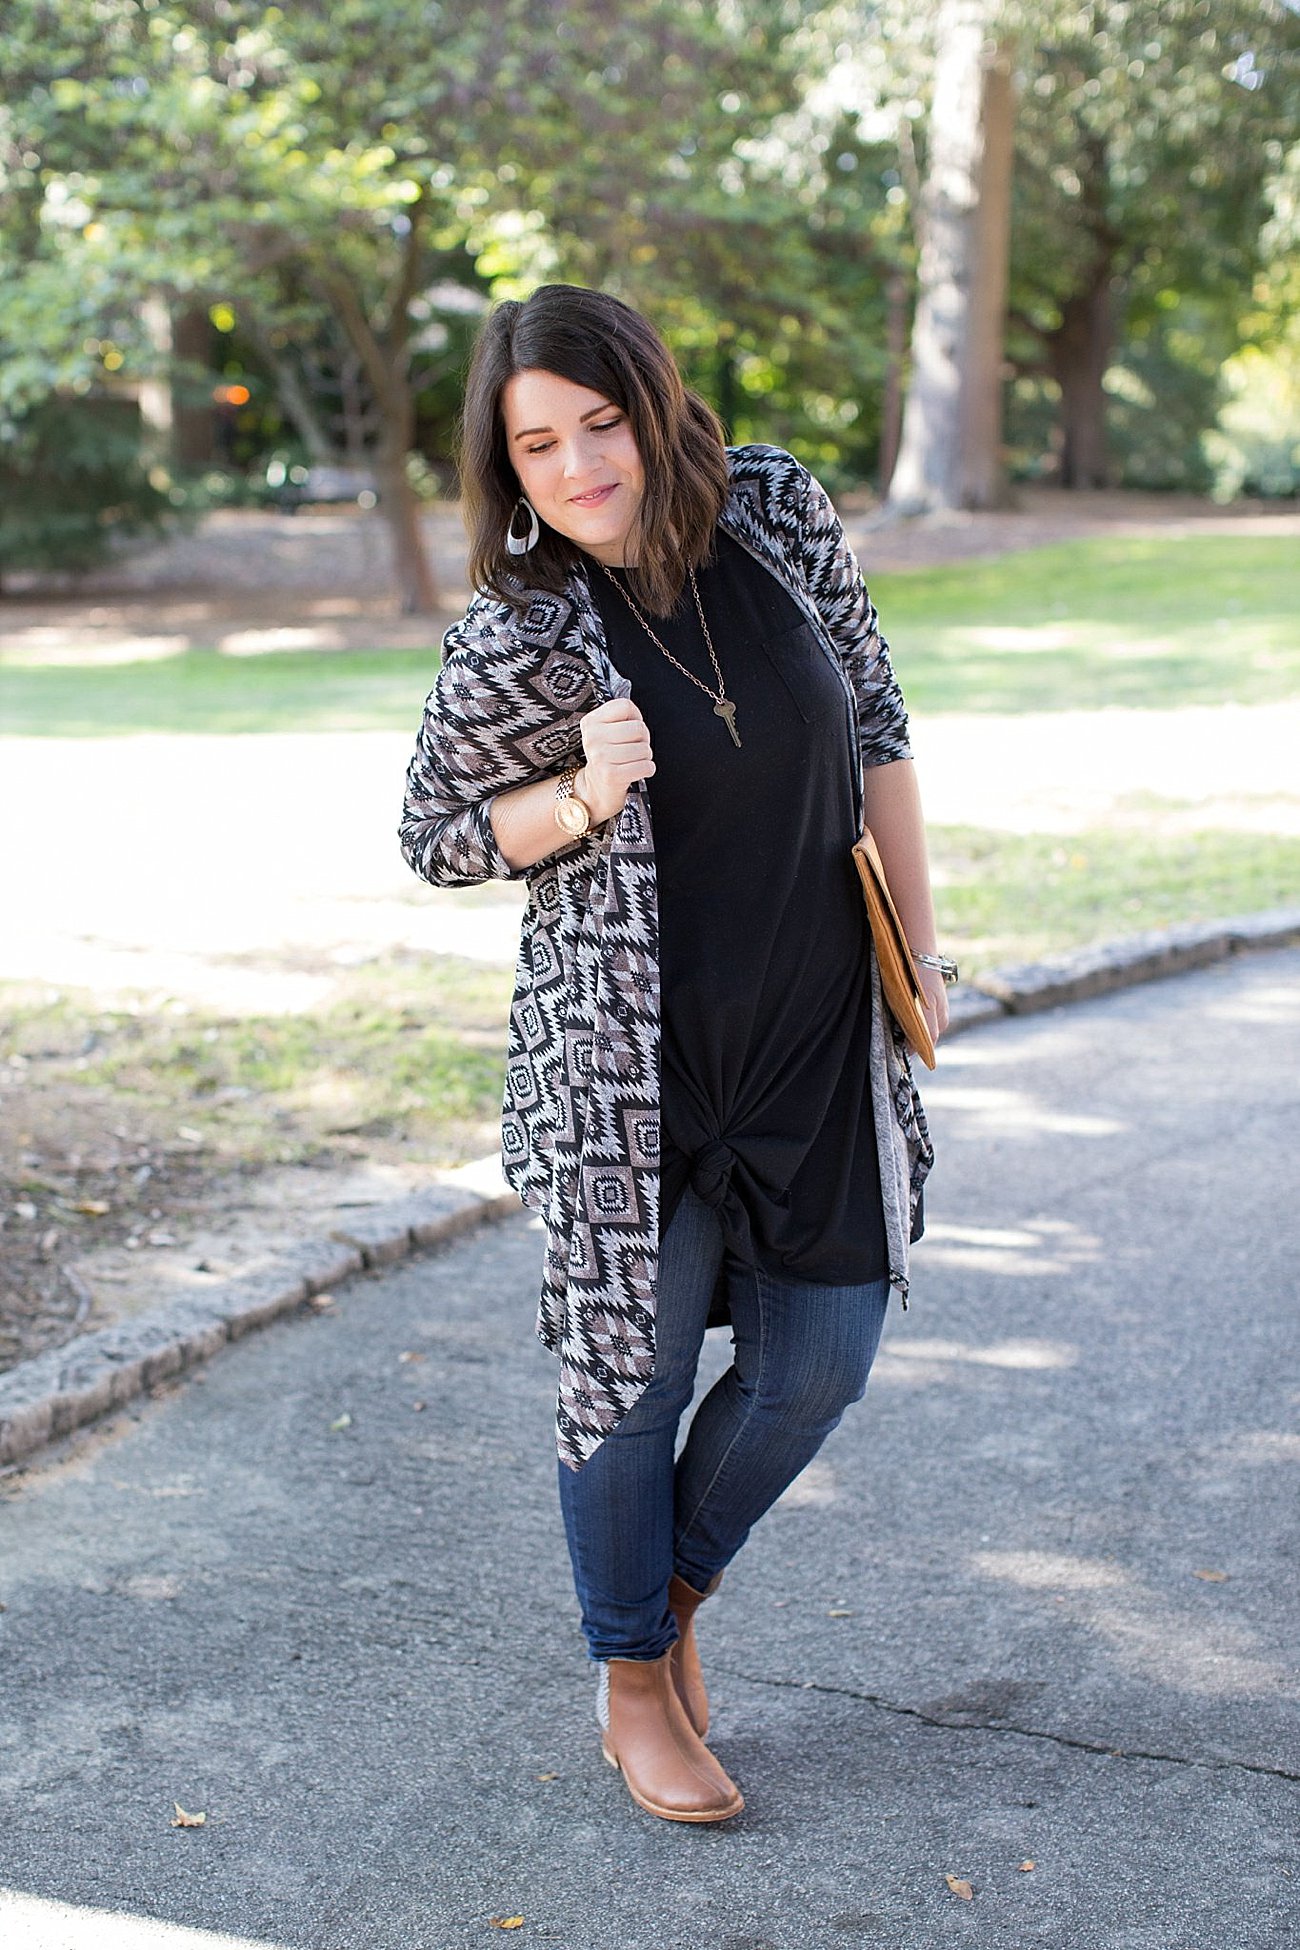 Lularoe Carly dress, skinny jeans, The Root Collective Espe booties, The Flourish Market cardigan (5)